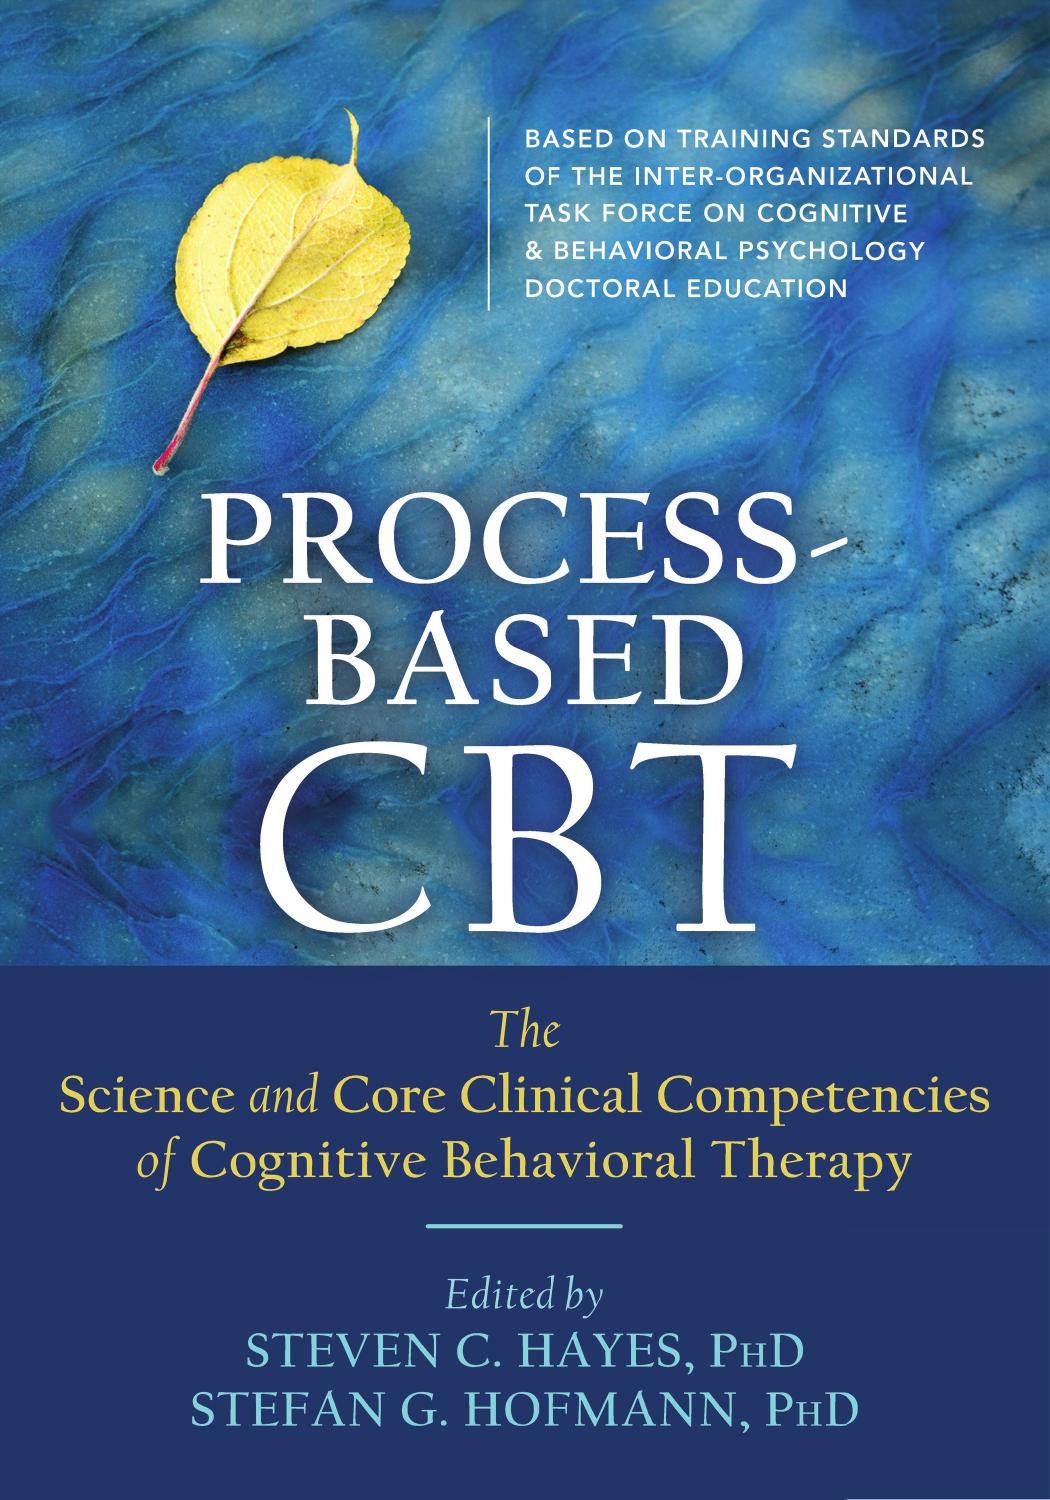 Process-Based CBT  The Science and Core Clinical Competencies of Cognitive Behavioral Therapy ( PDFDrive ) 2018